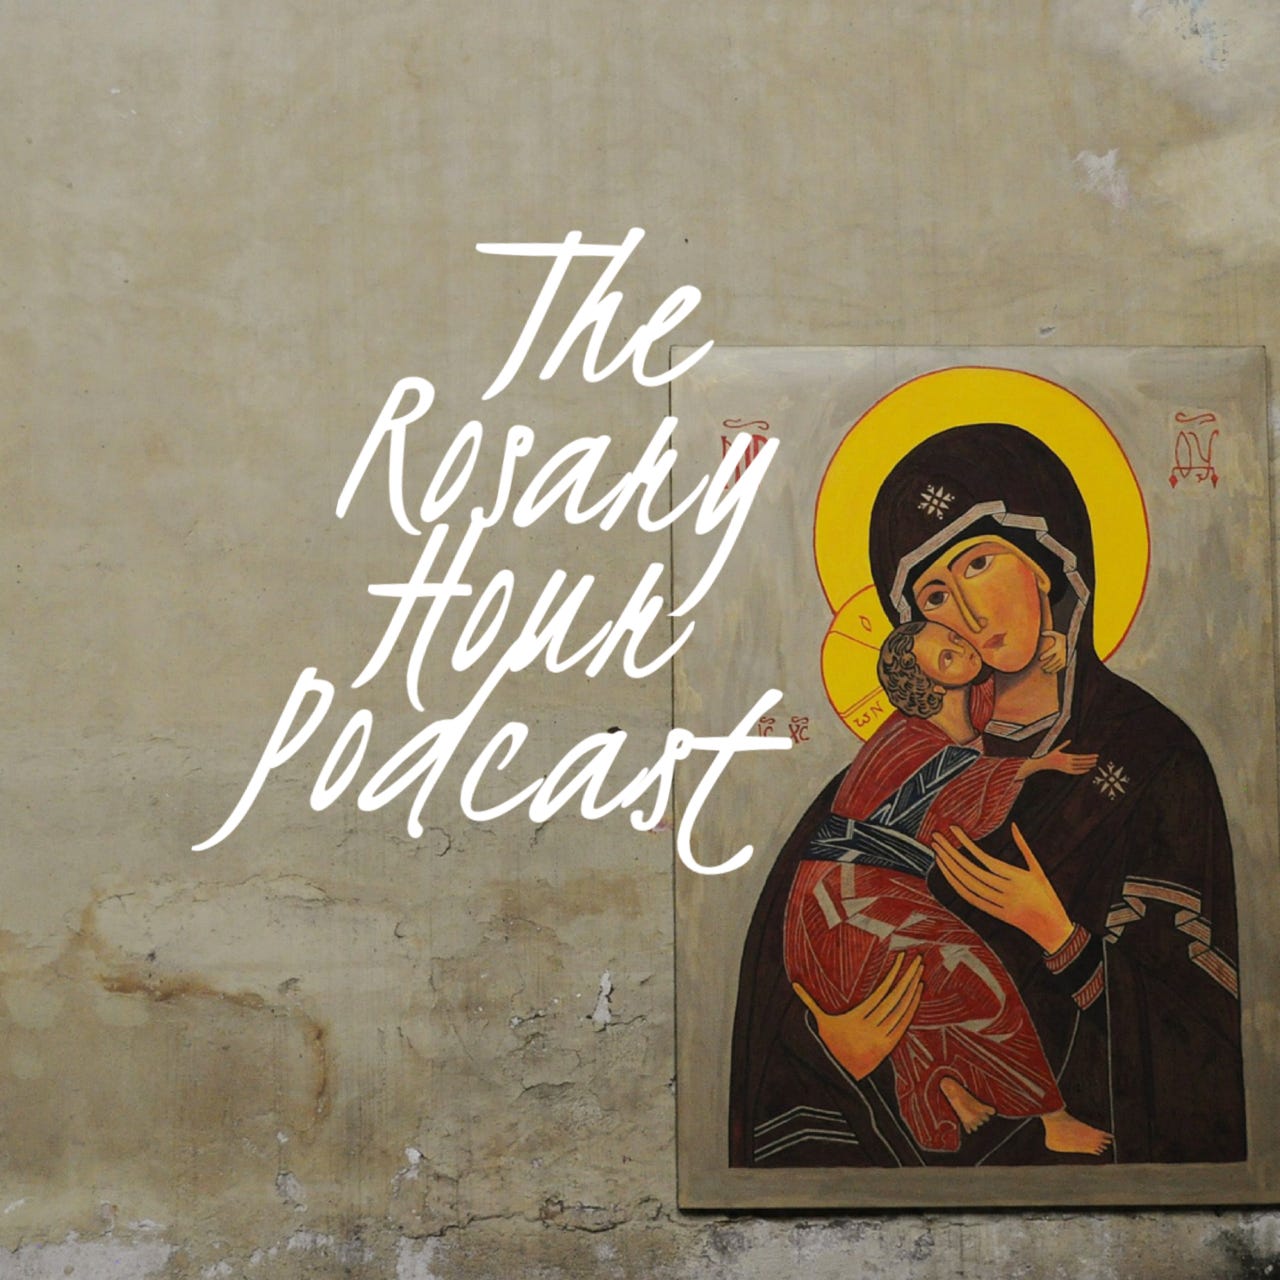 The Rosary Hour Podcast Newsletter